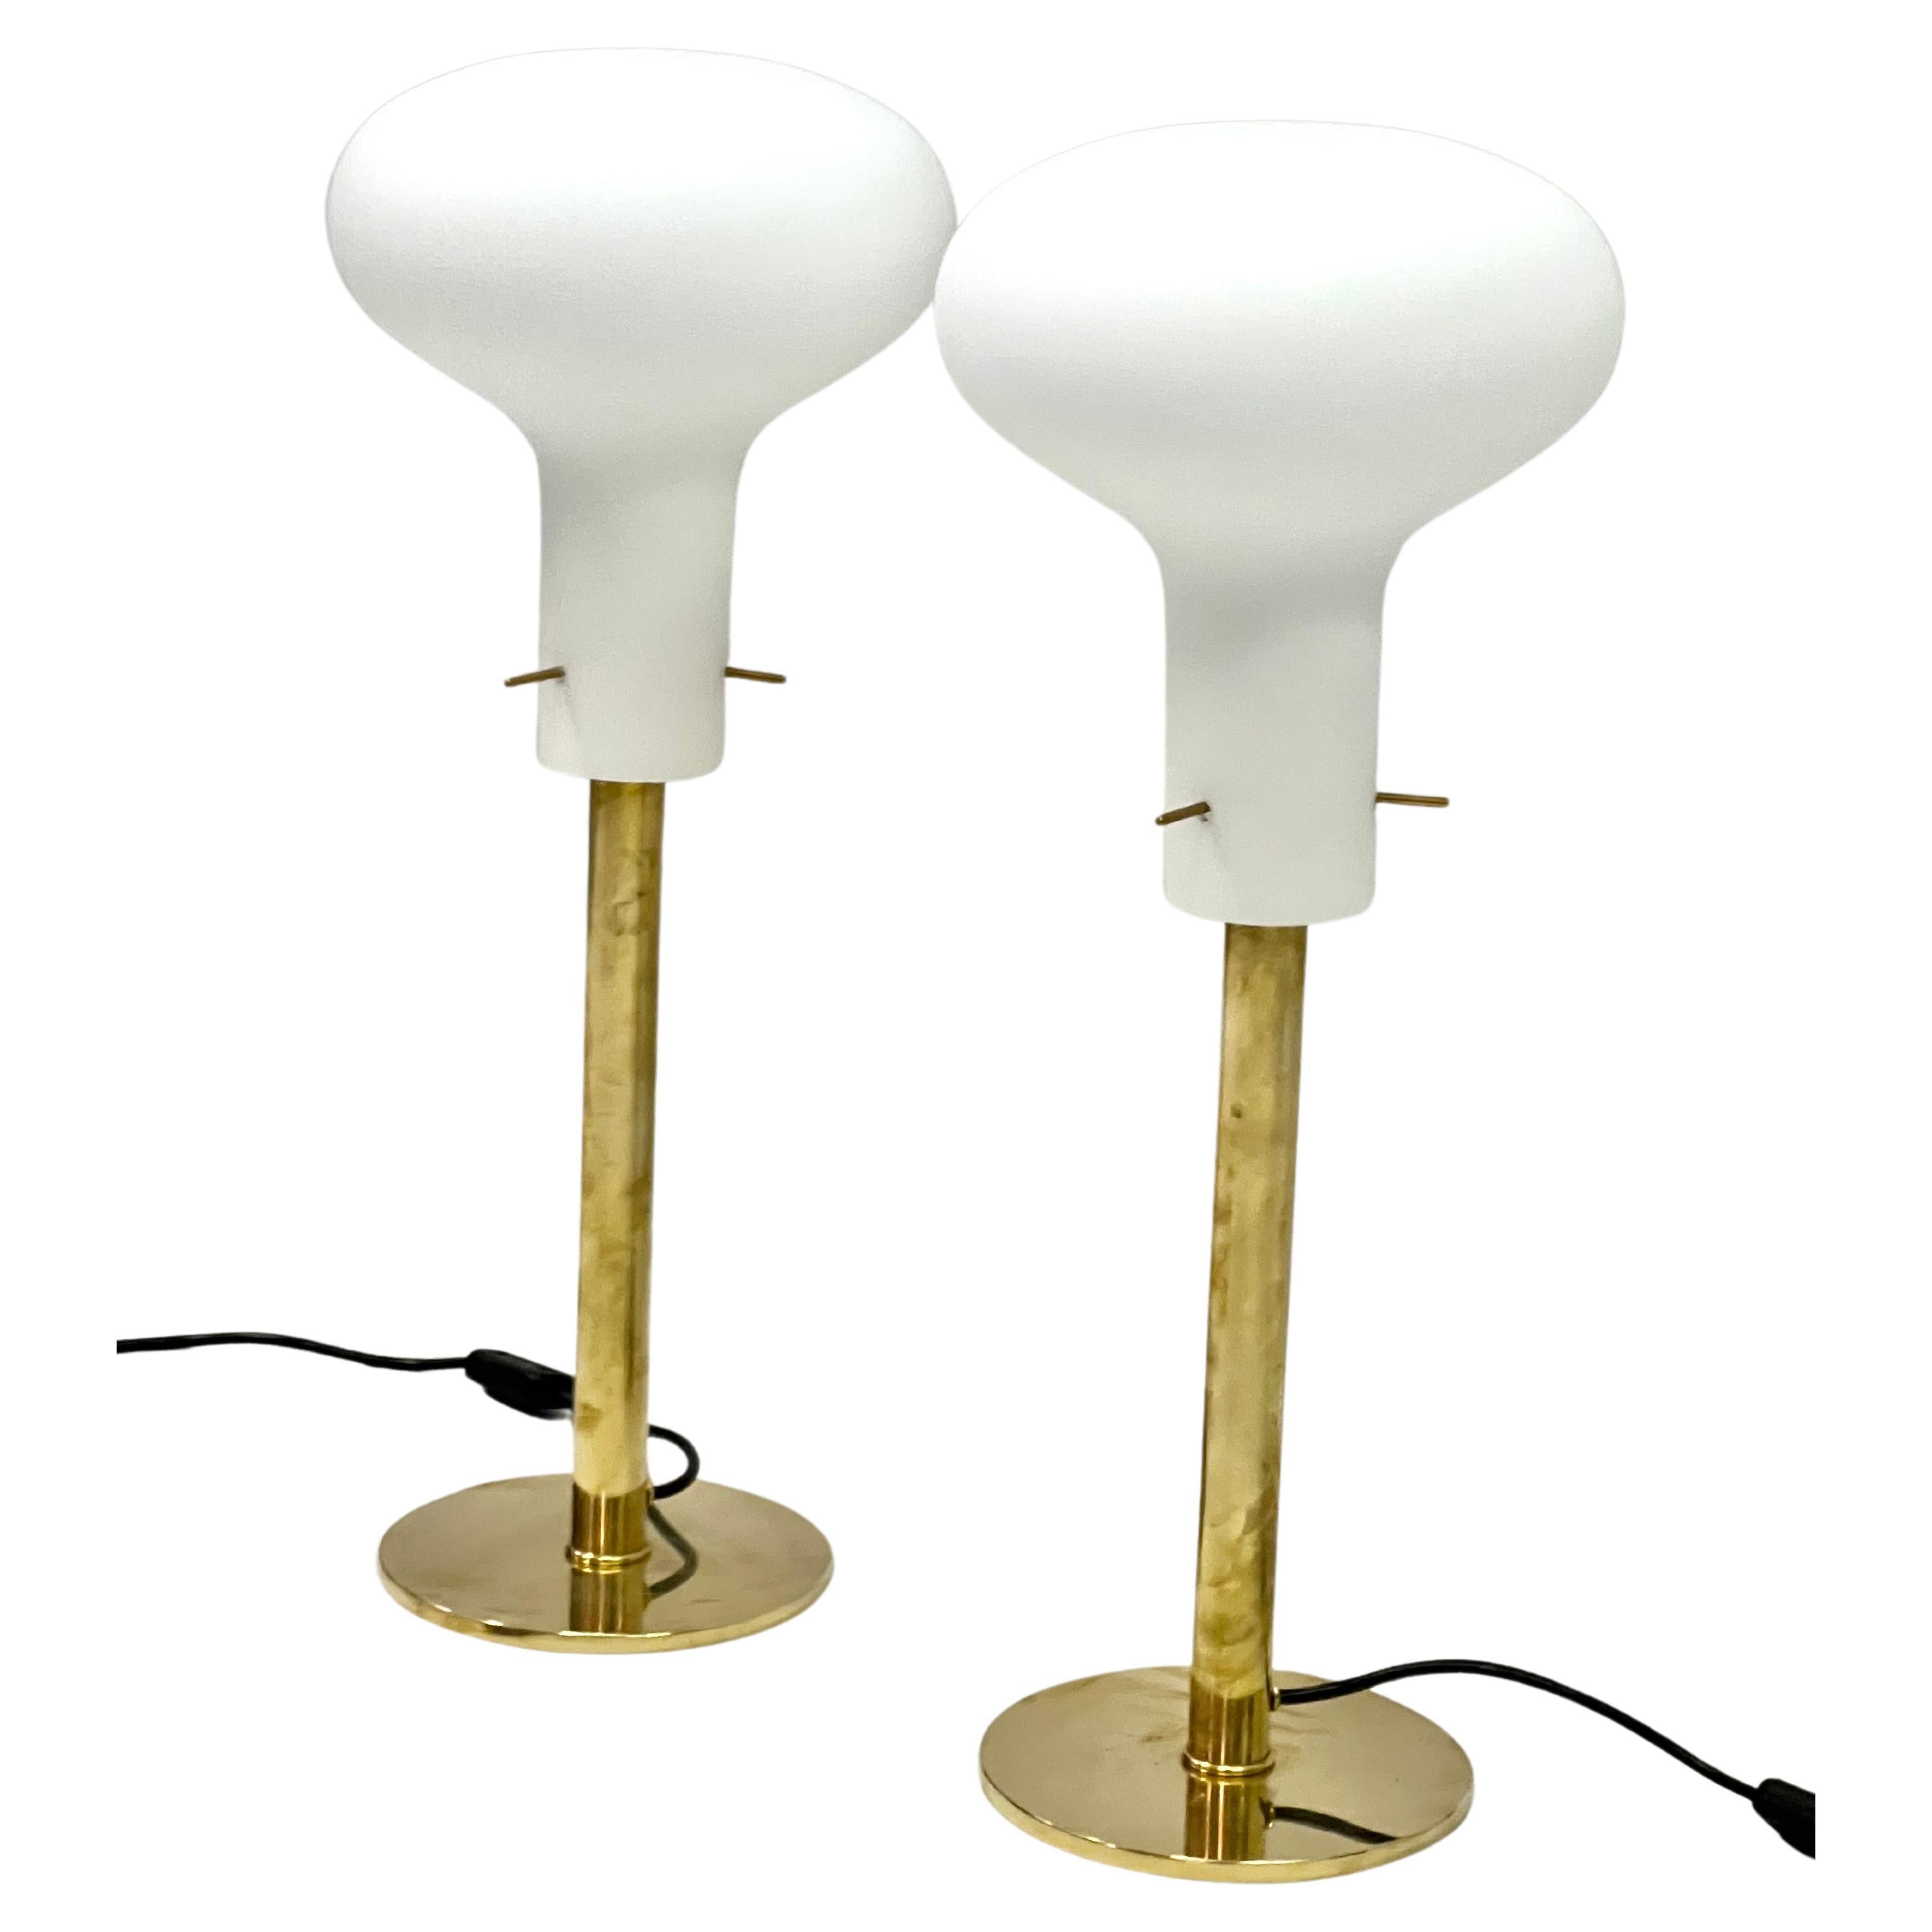 Pair of Italian Mid-Century Modern Brass Table Lamps, Max Ingrand & Fontana Arte For Sale